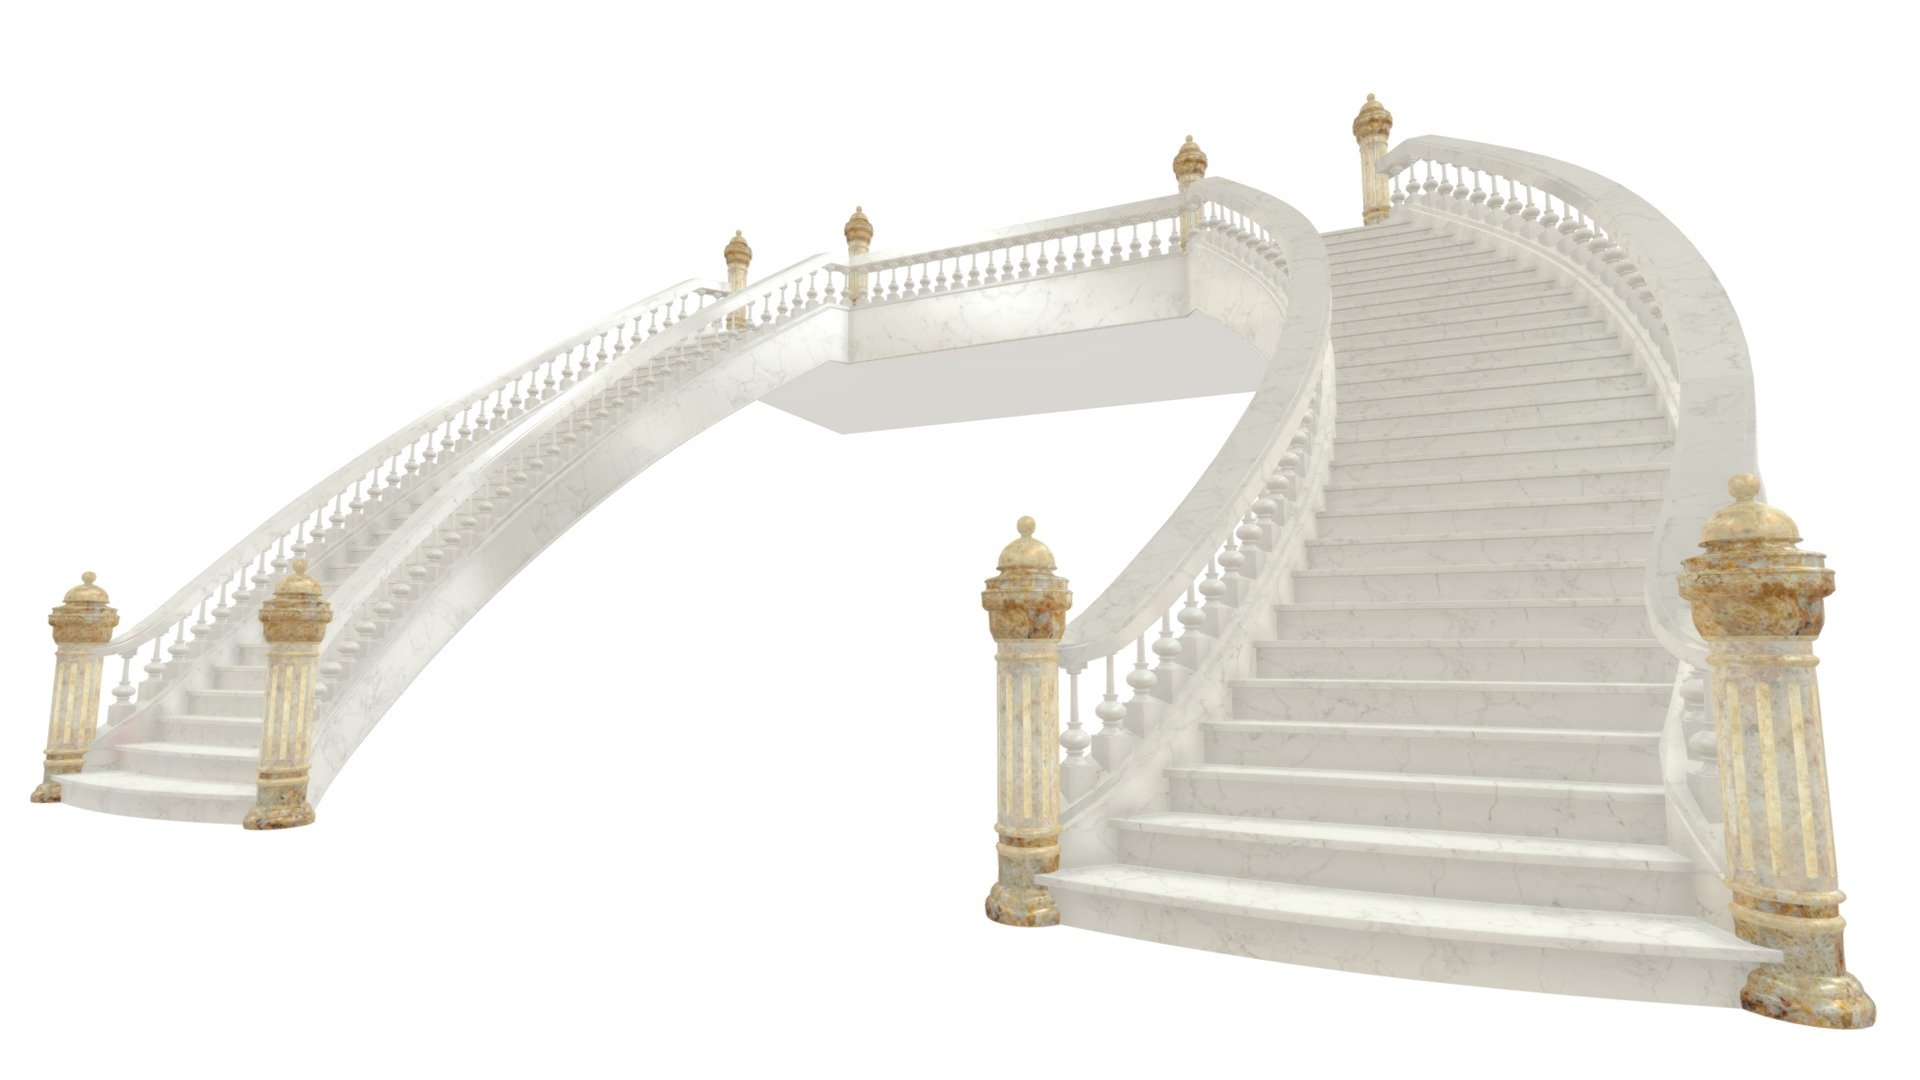 The best staircase for the interior of the hotel, hall&hellip; .
FBX file size : 3.52MB

Click on the link to see more models : https://sketchfab.com/GbehnamG/store

If you need customized 3d models , feel free to contact at: mr.gbehnamg@yahoo.com - Interior Classical Staircase Dec. 2020 - Buy Royalty Free 3D model by BehNaM (@GbehnamG) 3d model